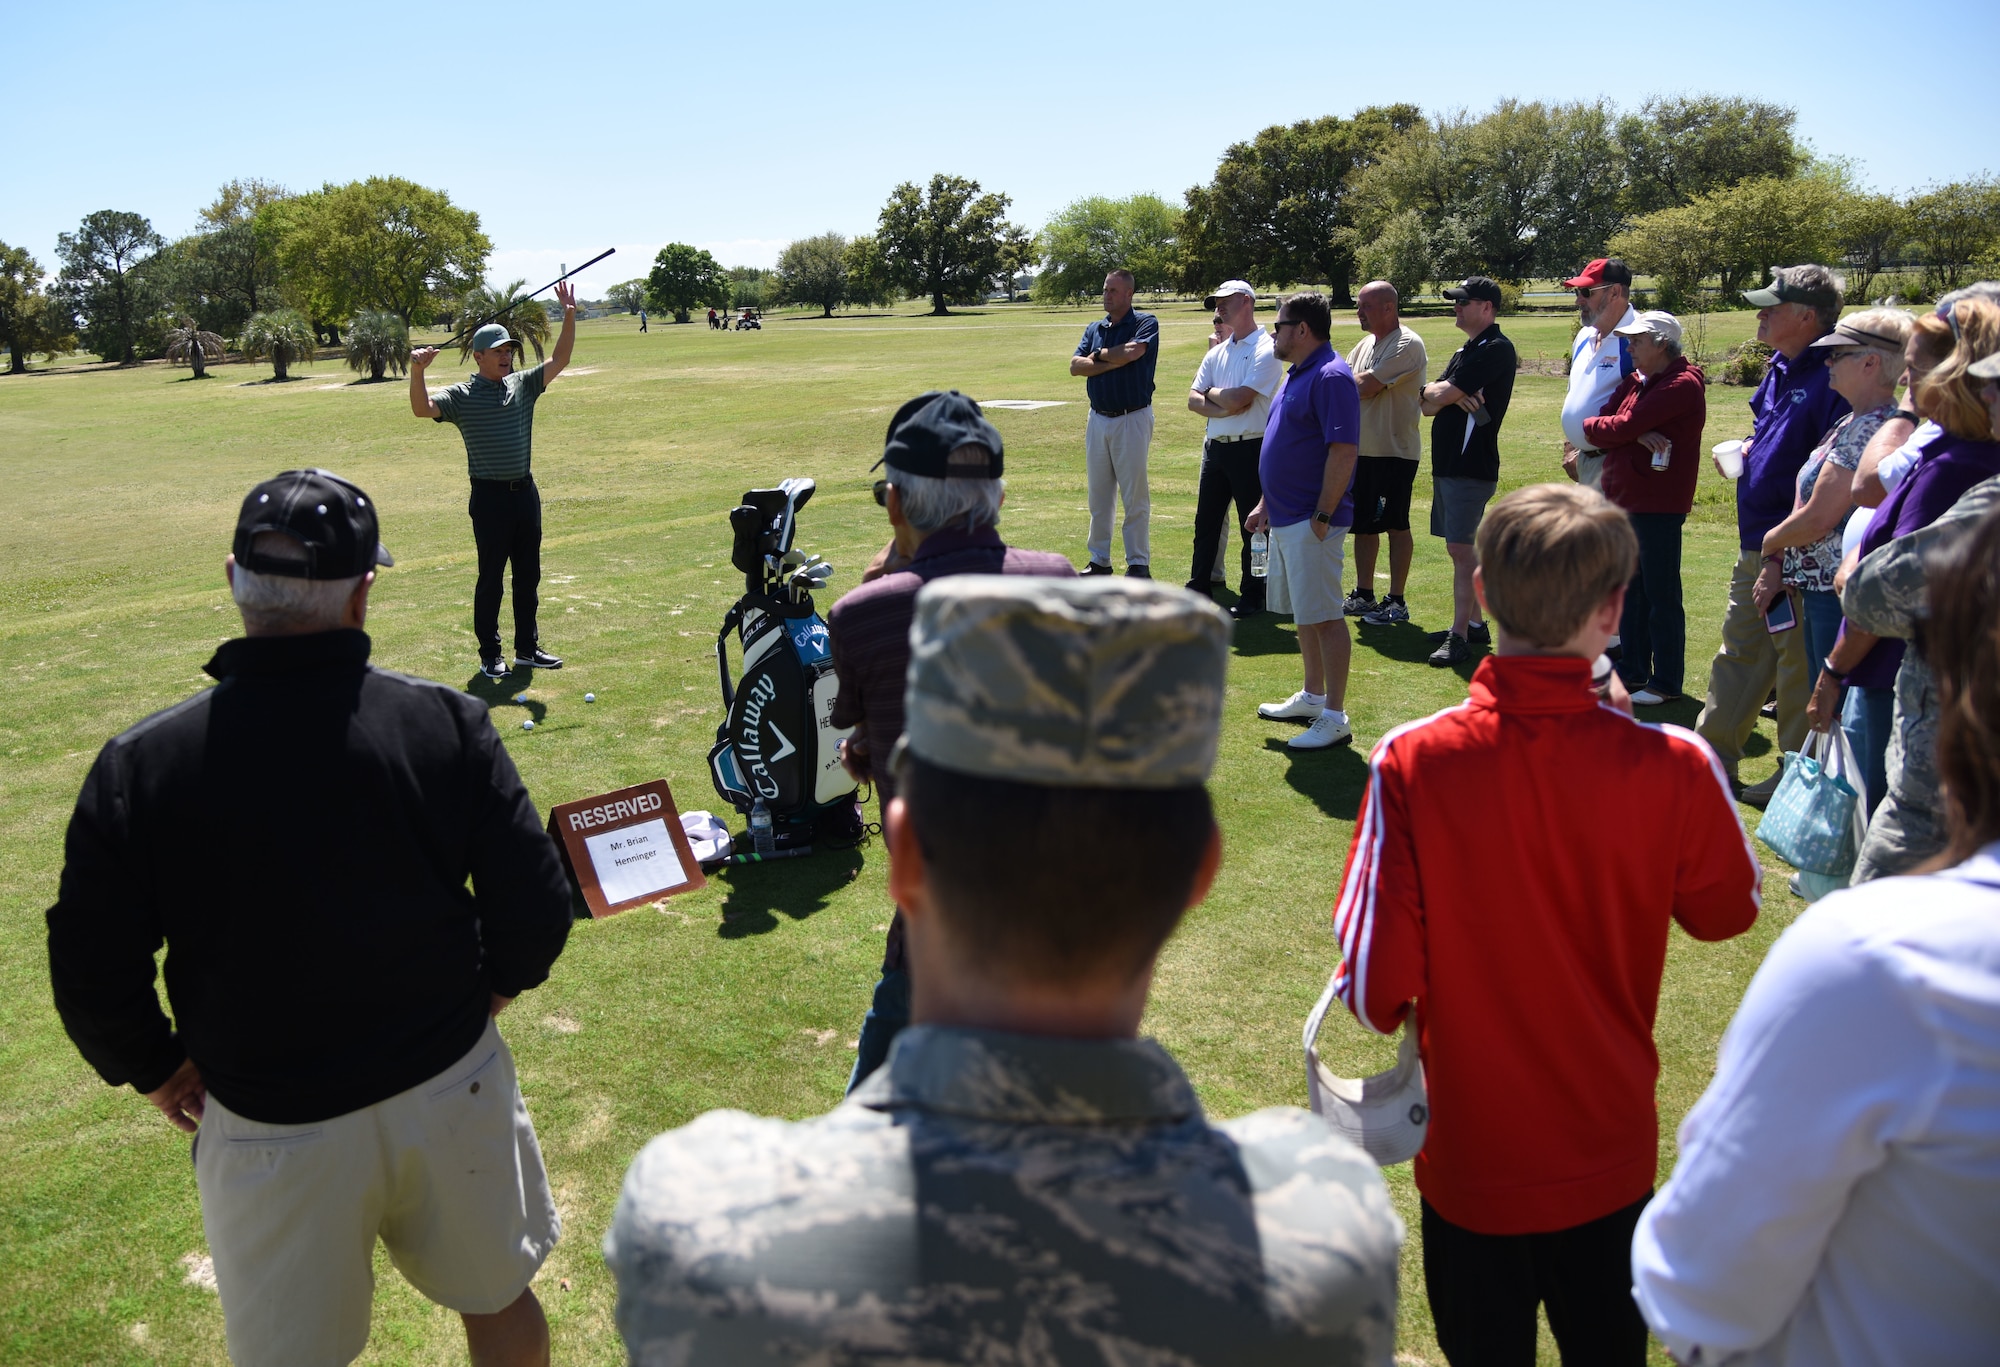 Brian Henninger, Professional Golfers’ Association champion player, provides golfing tips to Keesler personnel during a free clinic at the Bay Breeze Golf Course March 20, 2018, on Keesler Air Force Base, Mississippi. Henninger is a two-time PGA and three-time nationwide tour champion and this is the first time he has held a clinic at Keesler. (U.S. Air Force photo by Kemberly Groue)